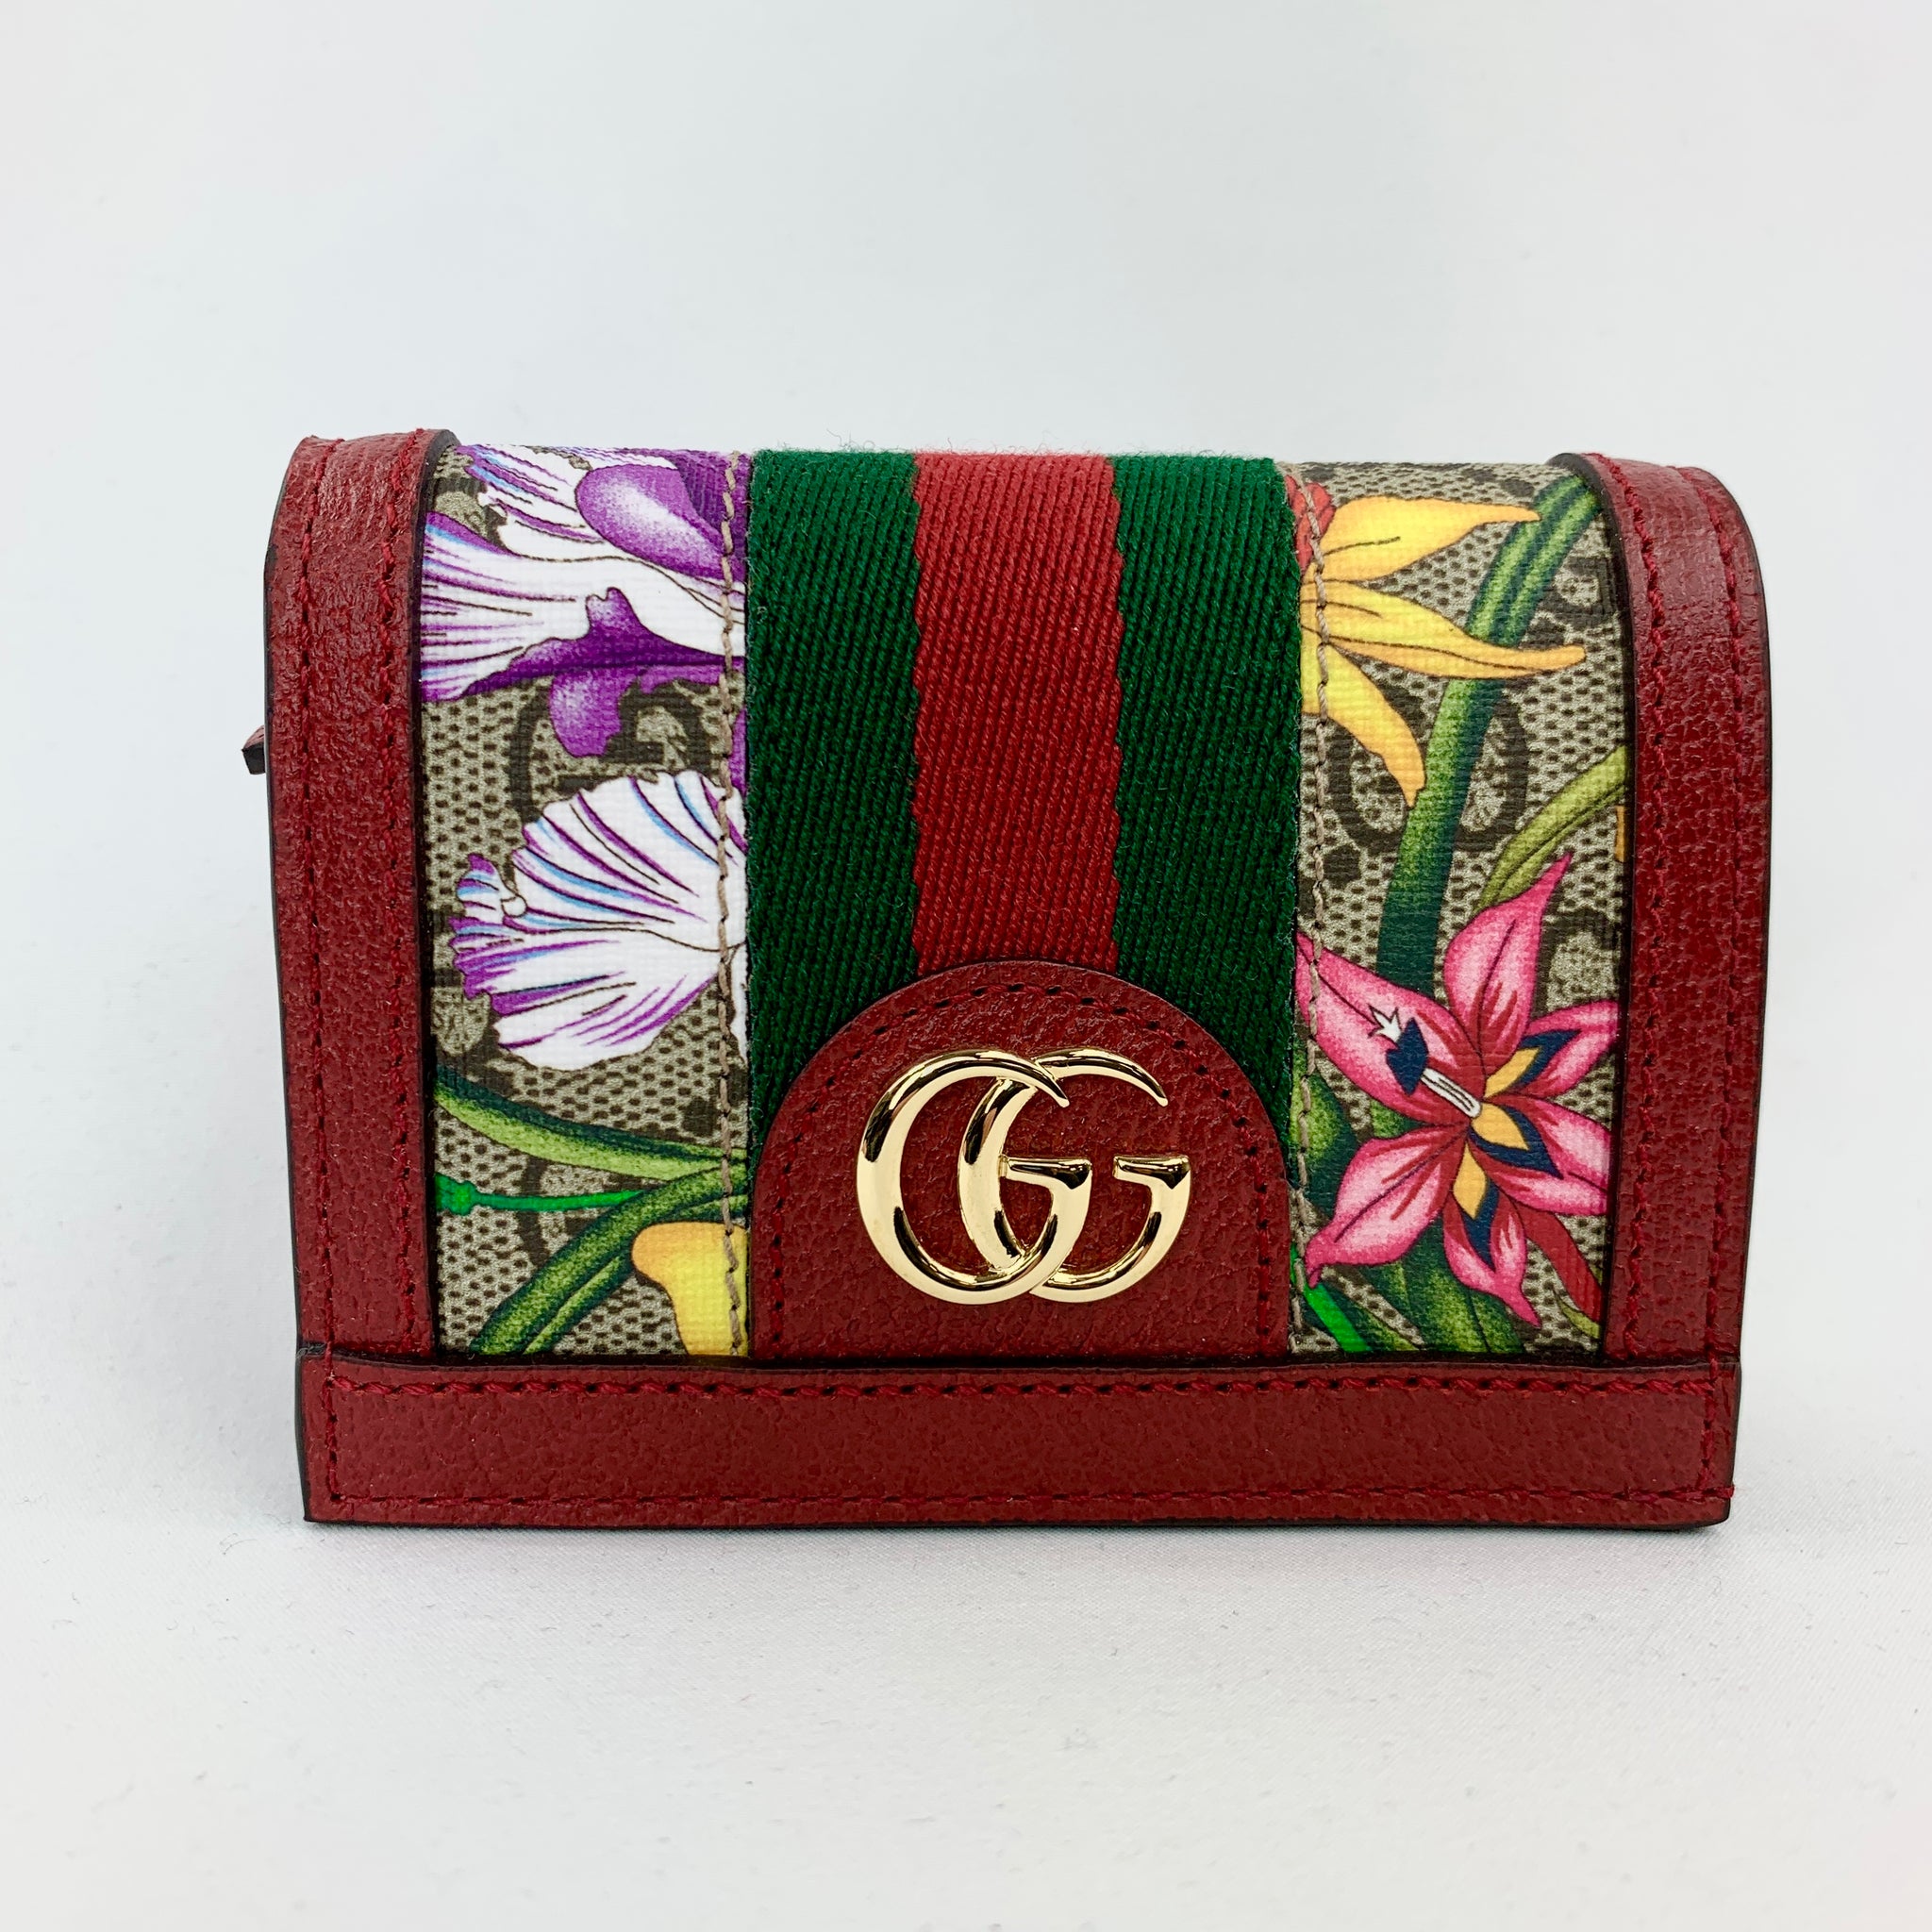 Gucci Ophidia GG Leather Wallet